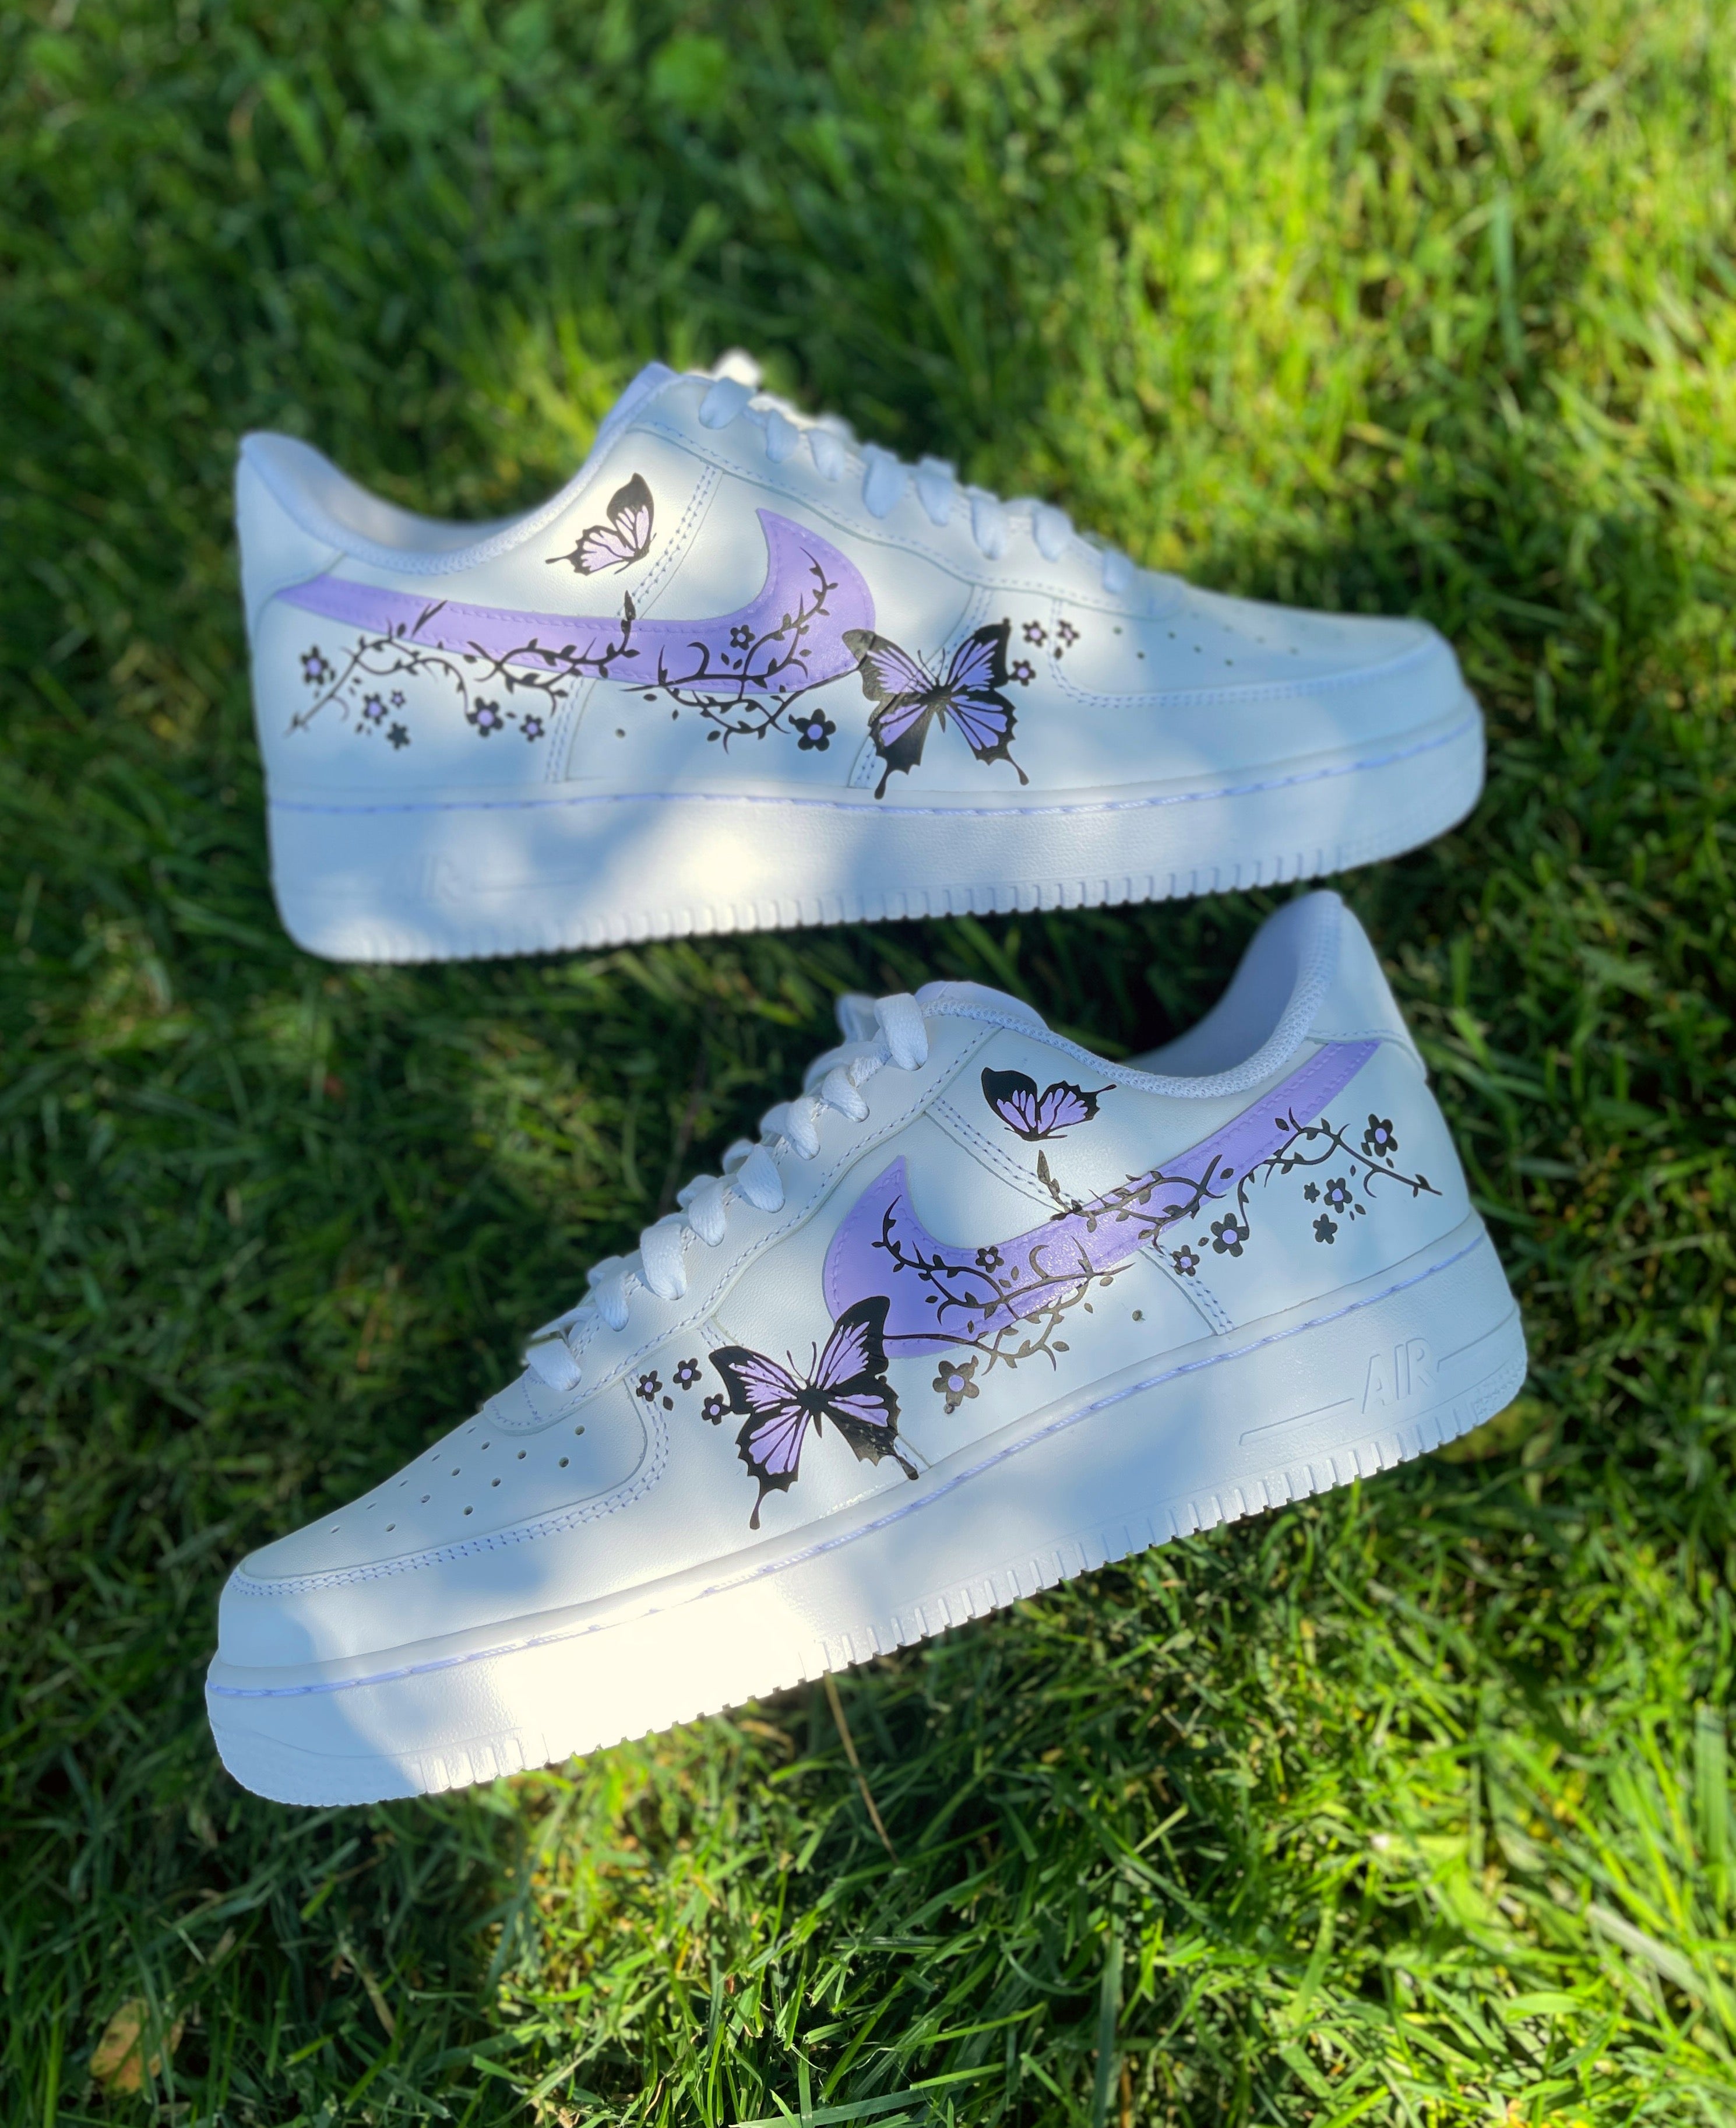 Dripping Purple Custom Air Force 1 Sneakers with Butterflies. Low